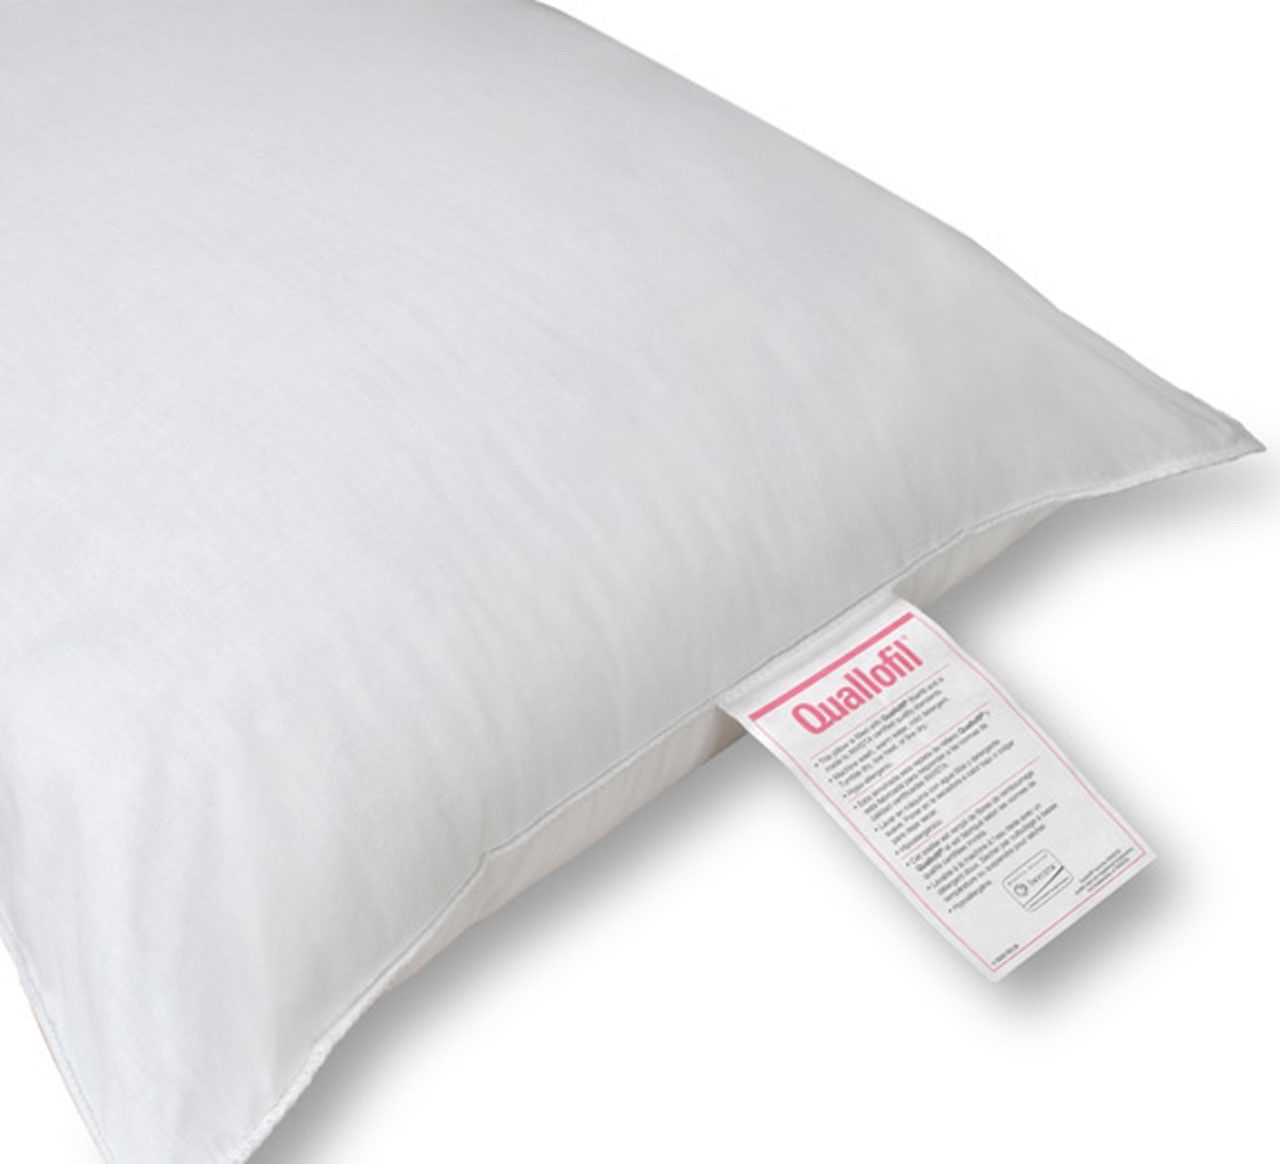 Is the Quallofil pillow, also known as Qualofill II® Pillow, a problem if I have allergies?